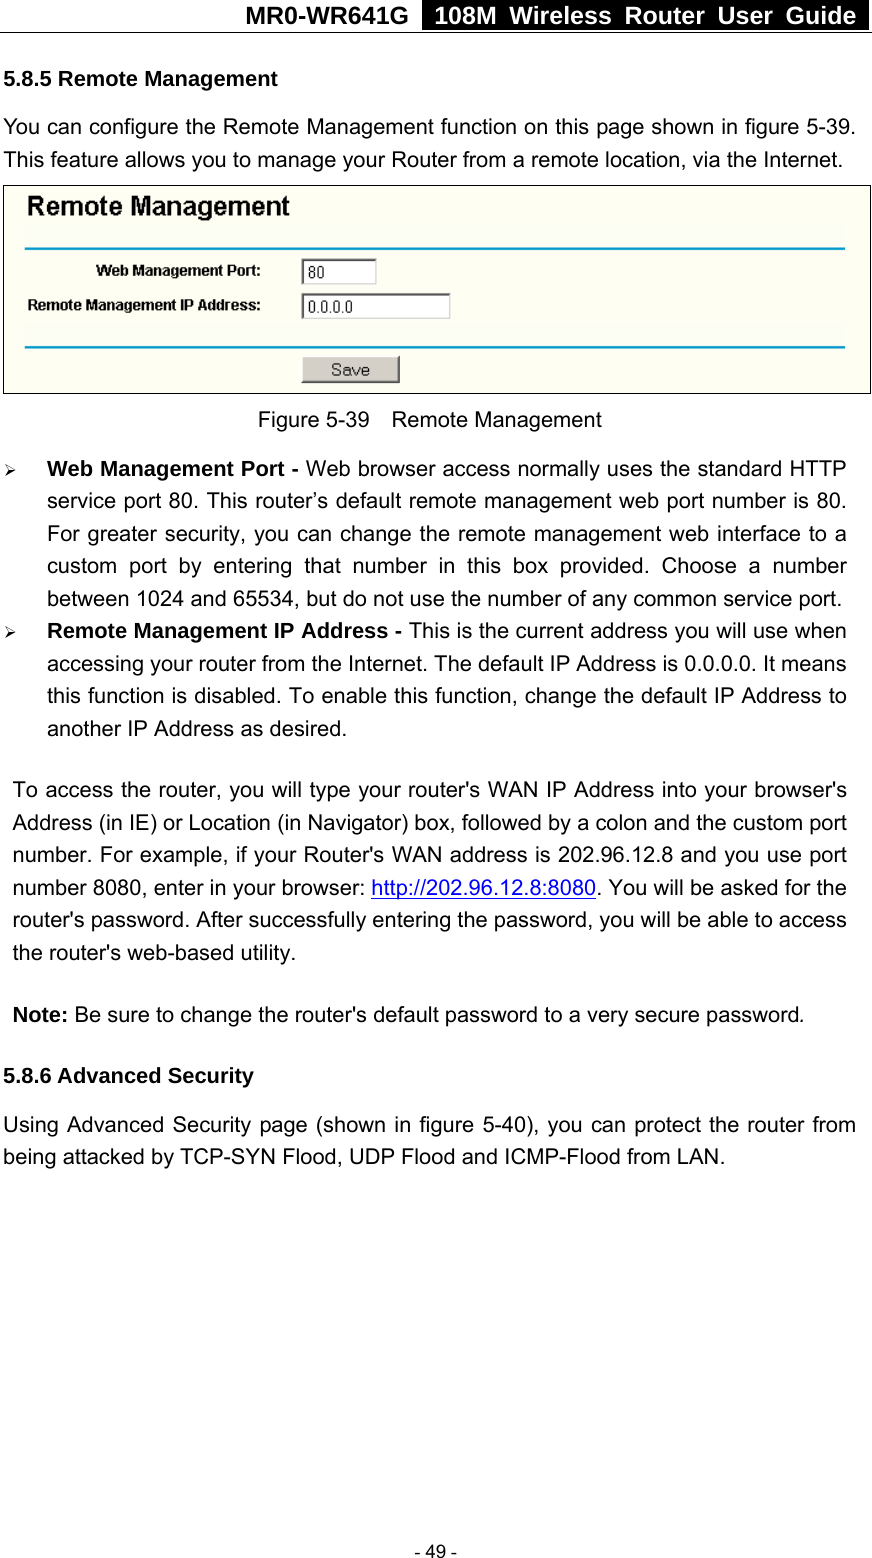 MR0-WR641G   108M Wireless Router User Guide  5.8.5 Remote Management You can configure the Remote Management function on this page shown in figure 5-39. This feature allows you to manage your Router from a remote location, via the Internet.   Figure 5-39  Remote Management ¾ Web Management Port - Web browser access normally uses the standard HTTP service port 80. This router’s default remote management web port number is 80. For greater security, you can change the remote management web interface to a custom port by entering that number in this box provided. Choose a number between 1024 and 65534, but do not use the number of any common service port. ¾ Remote Management IP Address - This is the current address you will use when accessing your router from the Internet. The default IP Address is 0.0.0.0. It means this function is disabled. To enable this function, change the default IP Address to another IP Address as desired.   To access the router, you will type your router&apos;s WAN IP Address into your browser&apos;s Address (in IE) or Location (in Navigator) box, followed by a colon and the custom port number. For example, if your Router&apos;s WAN address is 202.96.12.8 and you use port number 8080, enter in your browser: http://202.96.12.8:8080. You will be asked for the router&apos;s password. After successfully entering the password, you will be able to access the router&apos;s web-based utility. Note: Be sure to change the router&apos;s default password to a very secure password. 5.8.6 Advanced Security Using Advanced Security page (shown in figure 5-40), you can protect the router from being attacked by TCP-SYN Flood, UDP Flood and ICMP-Flood from LAN.  - 49 - 